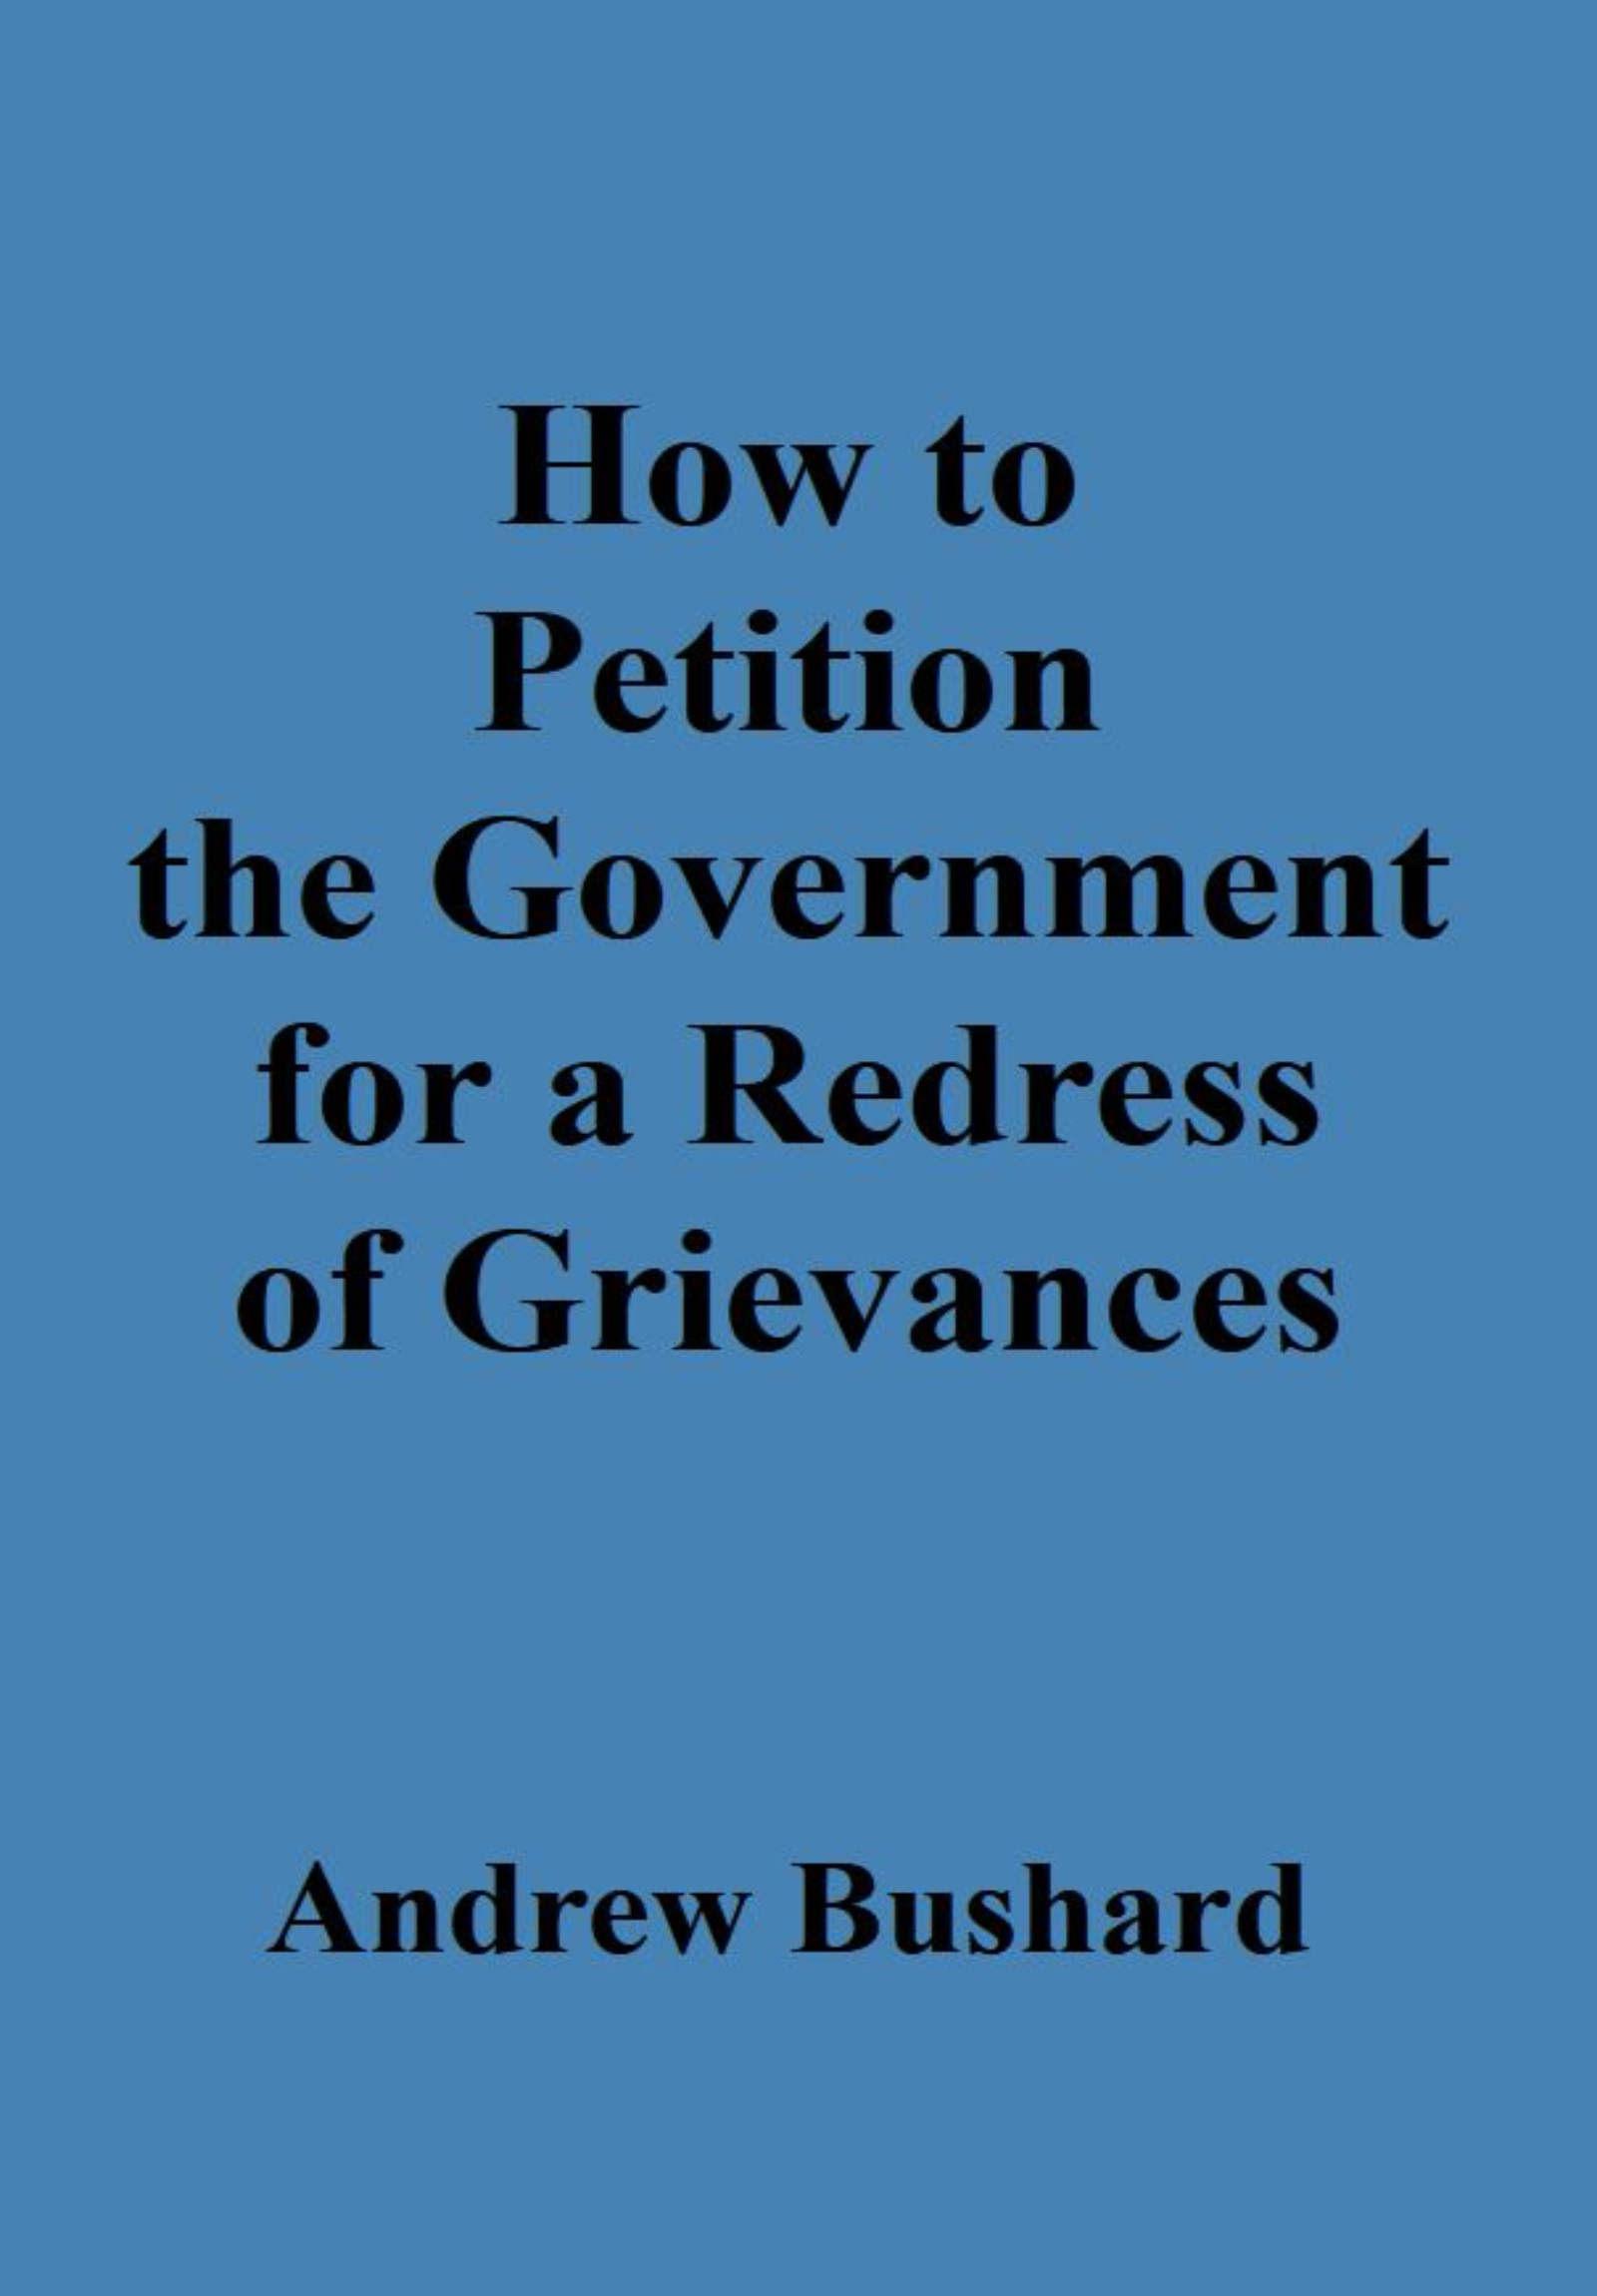 How to Petition the Government for a Redress of Grievances's featured image